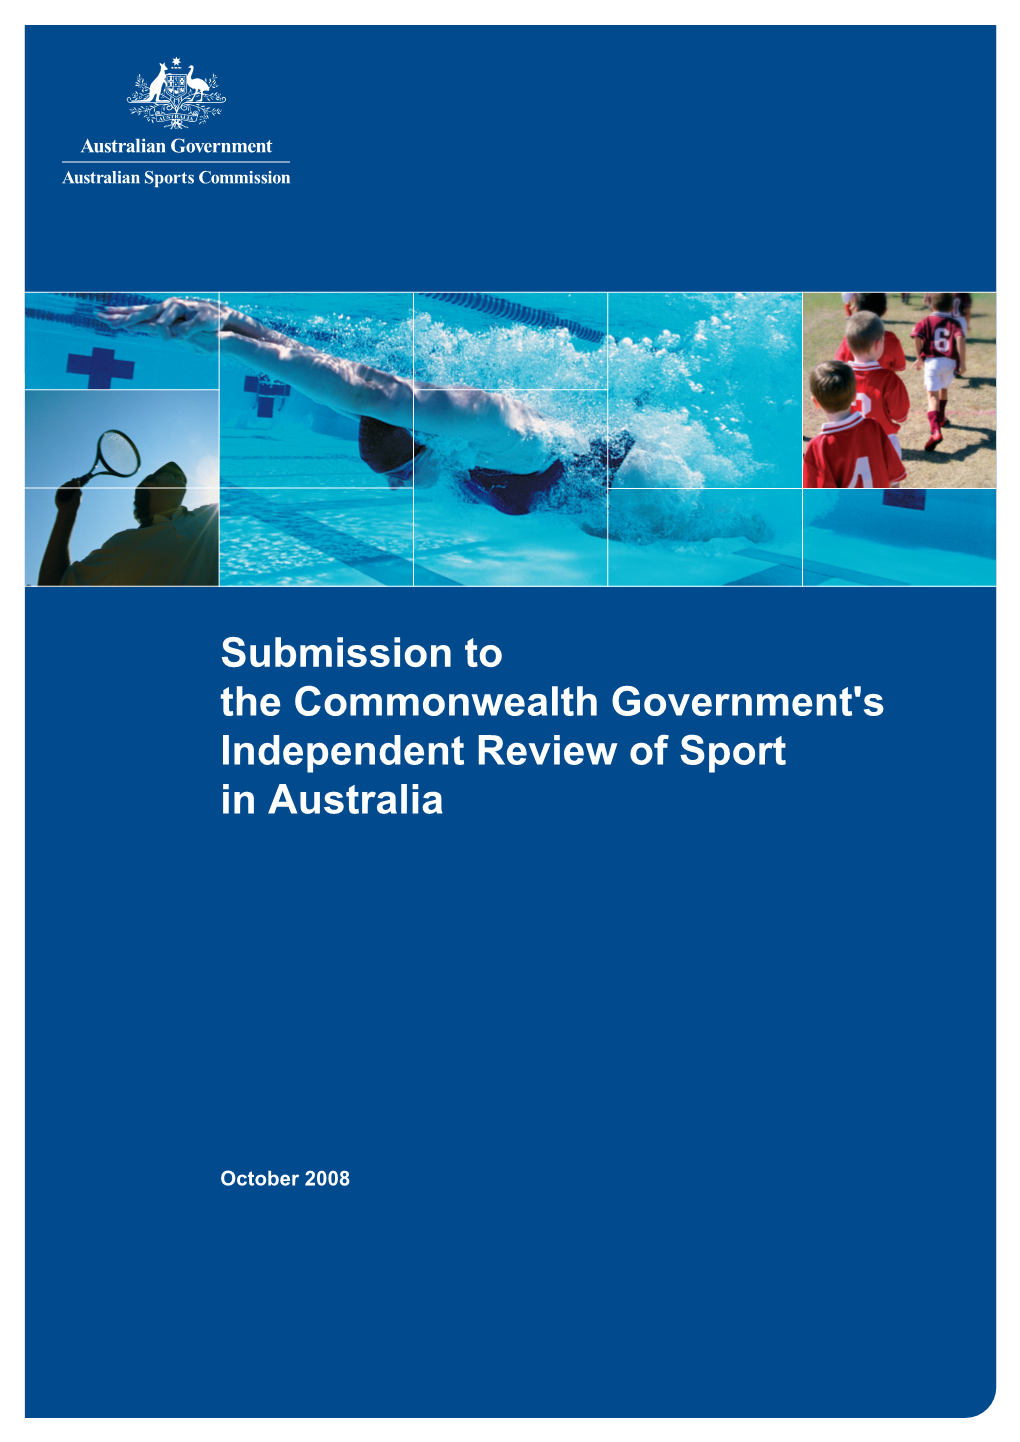 Submission to the Commonwealth Government's Independent Review of Sport in Australia